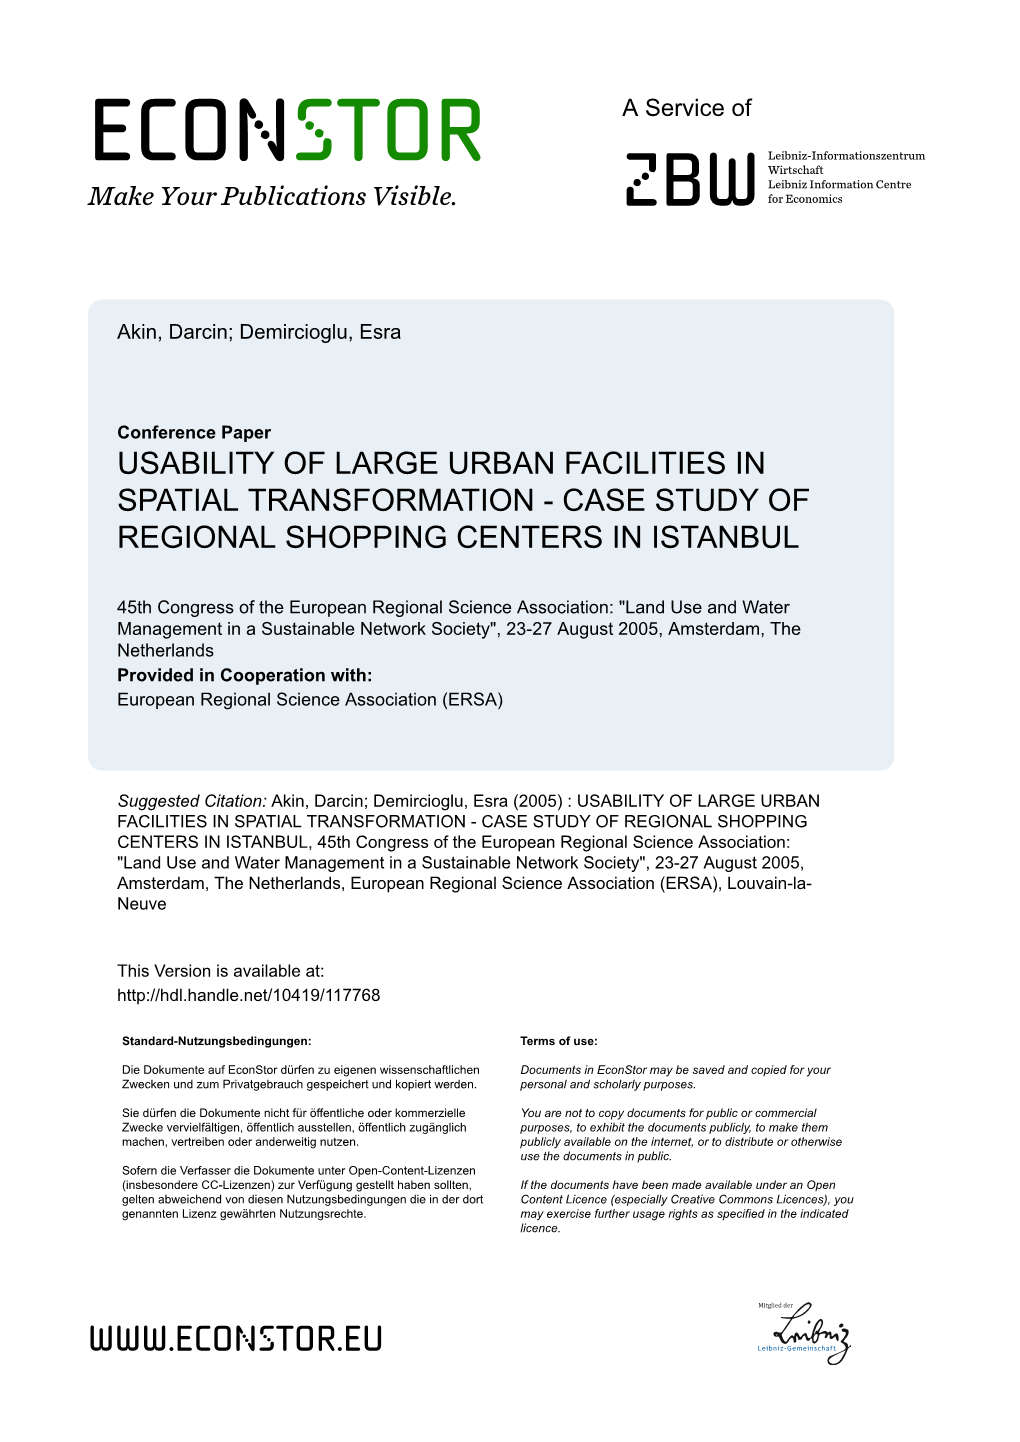 Usability of Large Urban Facilities in Spatial Transformation - Case Study of Regional Shopping Centers in Istanbul